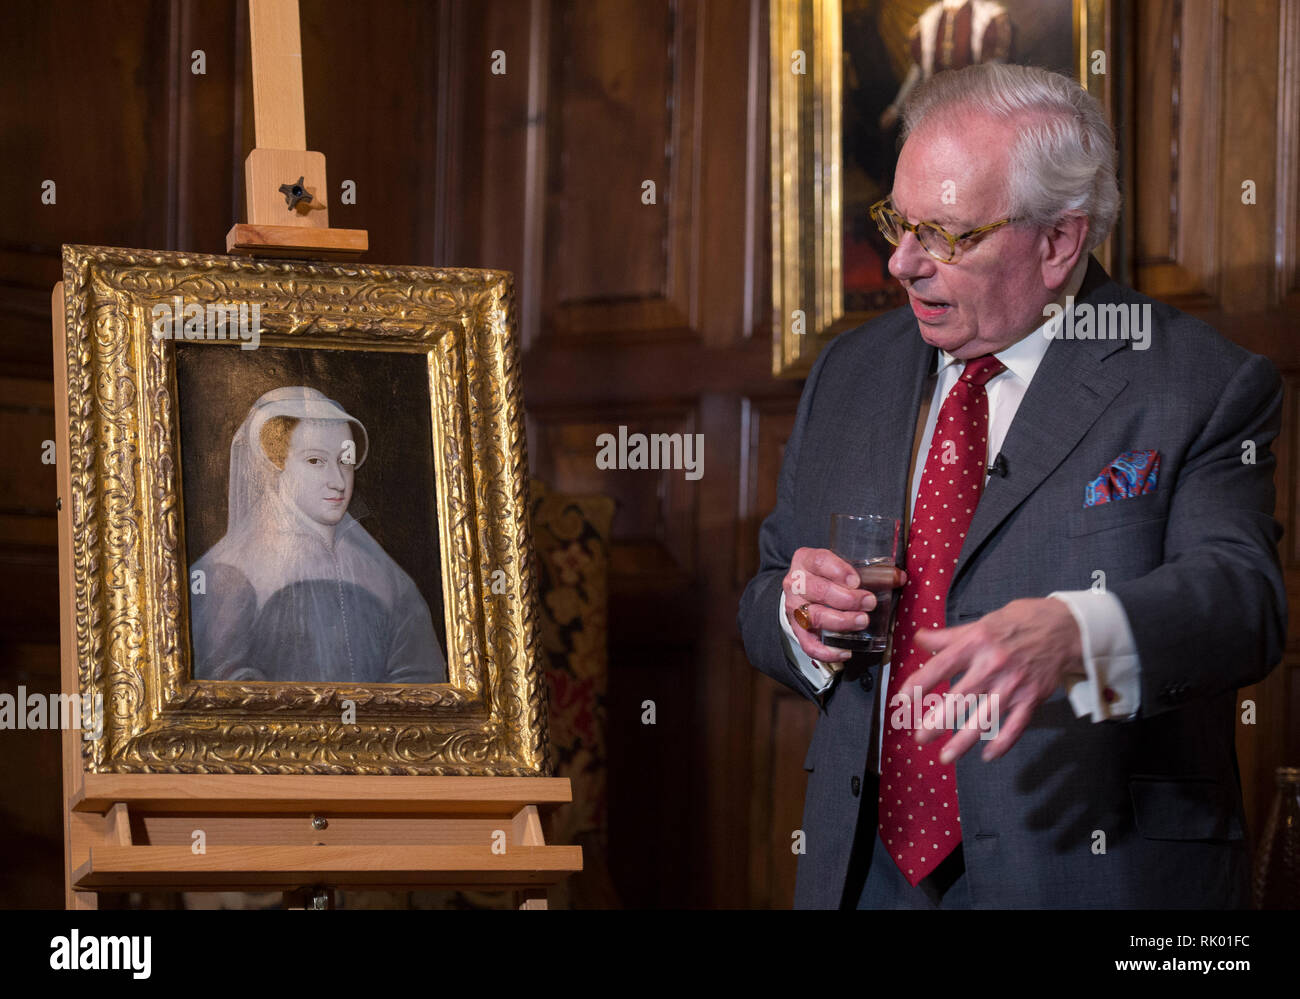 Hever Castle, Kent, UK. 8 February, 2019. 432 years after she died on the same date in 1587 - a portrait of Mary, Queen of Scots goes on display at Hever Castle, in Kent. The extremely rare painting of the monarch – whose life story has been dramatized in the hit movie, Mary Queen of Scots, with actress Saoirse Ronan portraying her - is officially unveiled in the castle’s Staircase Gallery by one of the world’s leading experts on Tudor history, Dr David Starkey (pictured) after it was recently rediscovered in France. Credit: Malcolm Park/Alamy Live News Stock Photo